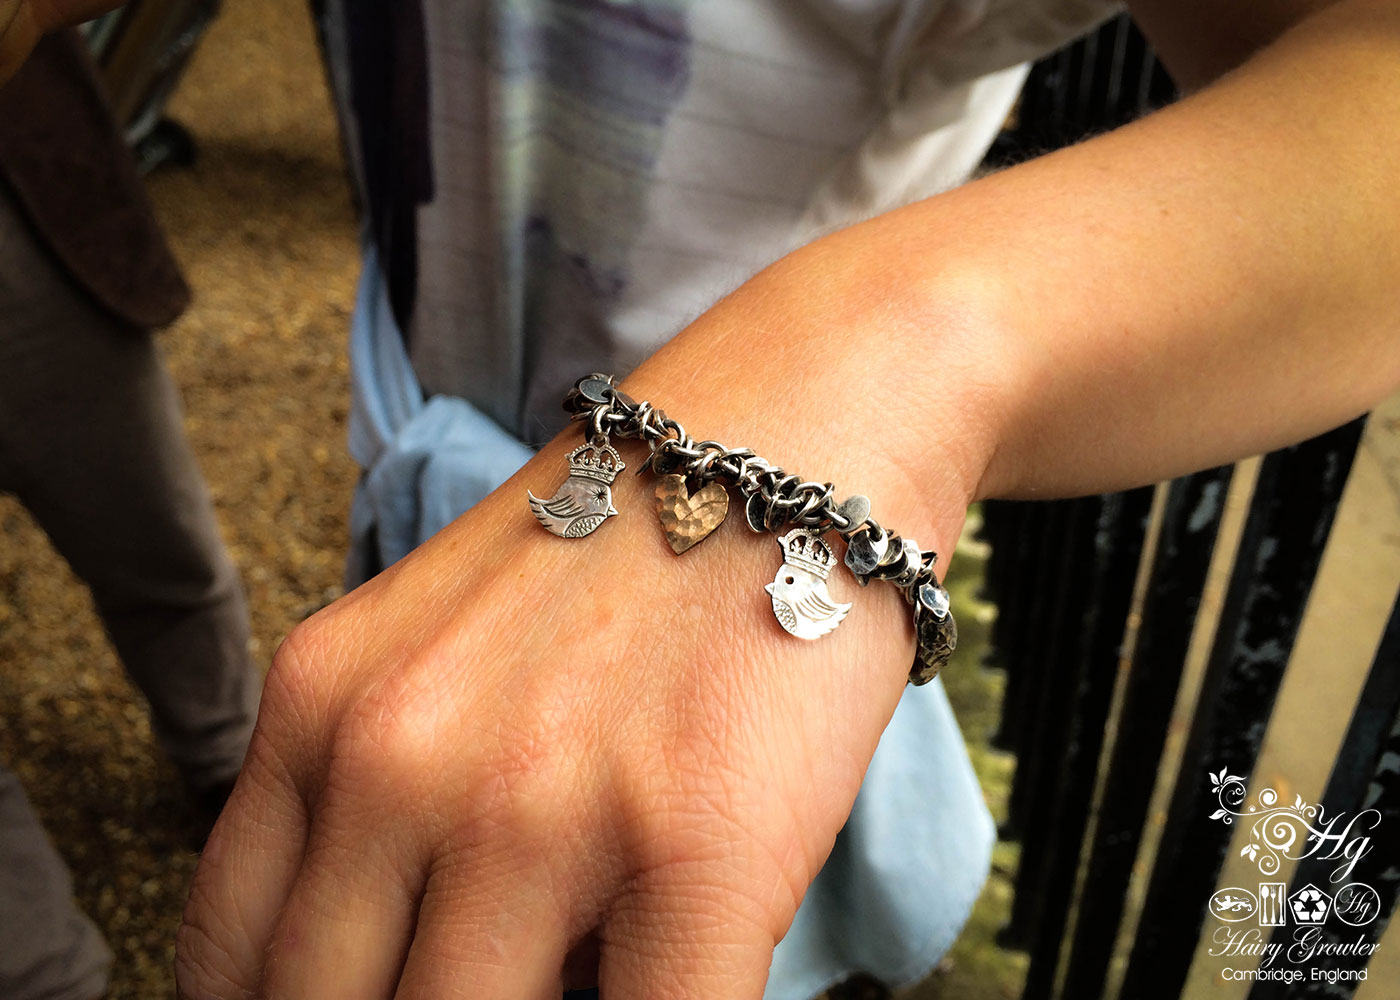 handcrafted teeny weeny Kingsy Queeny bird bracelet upcycled silver threepence coins